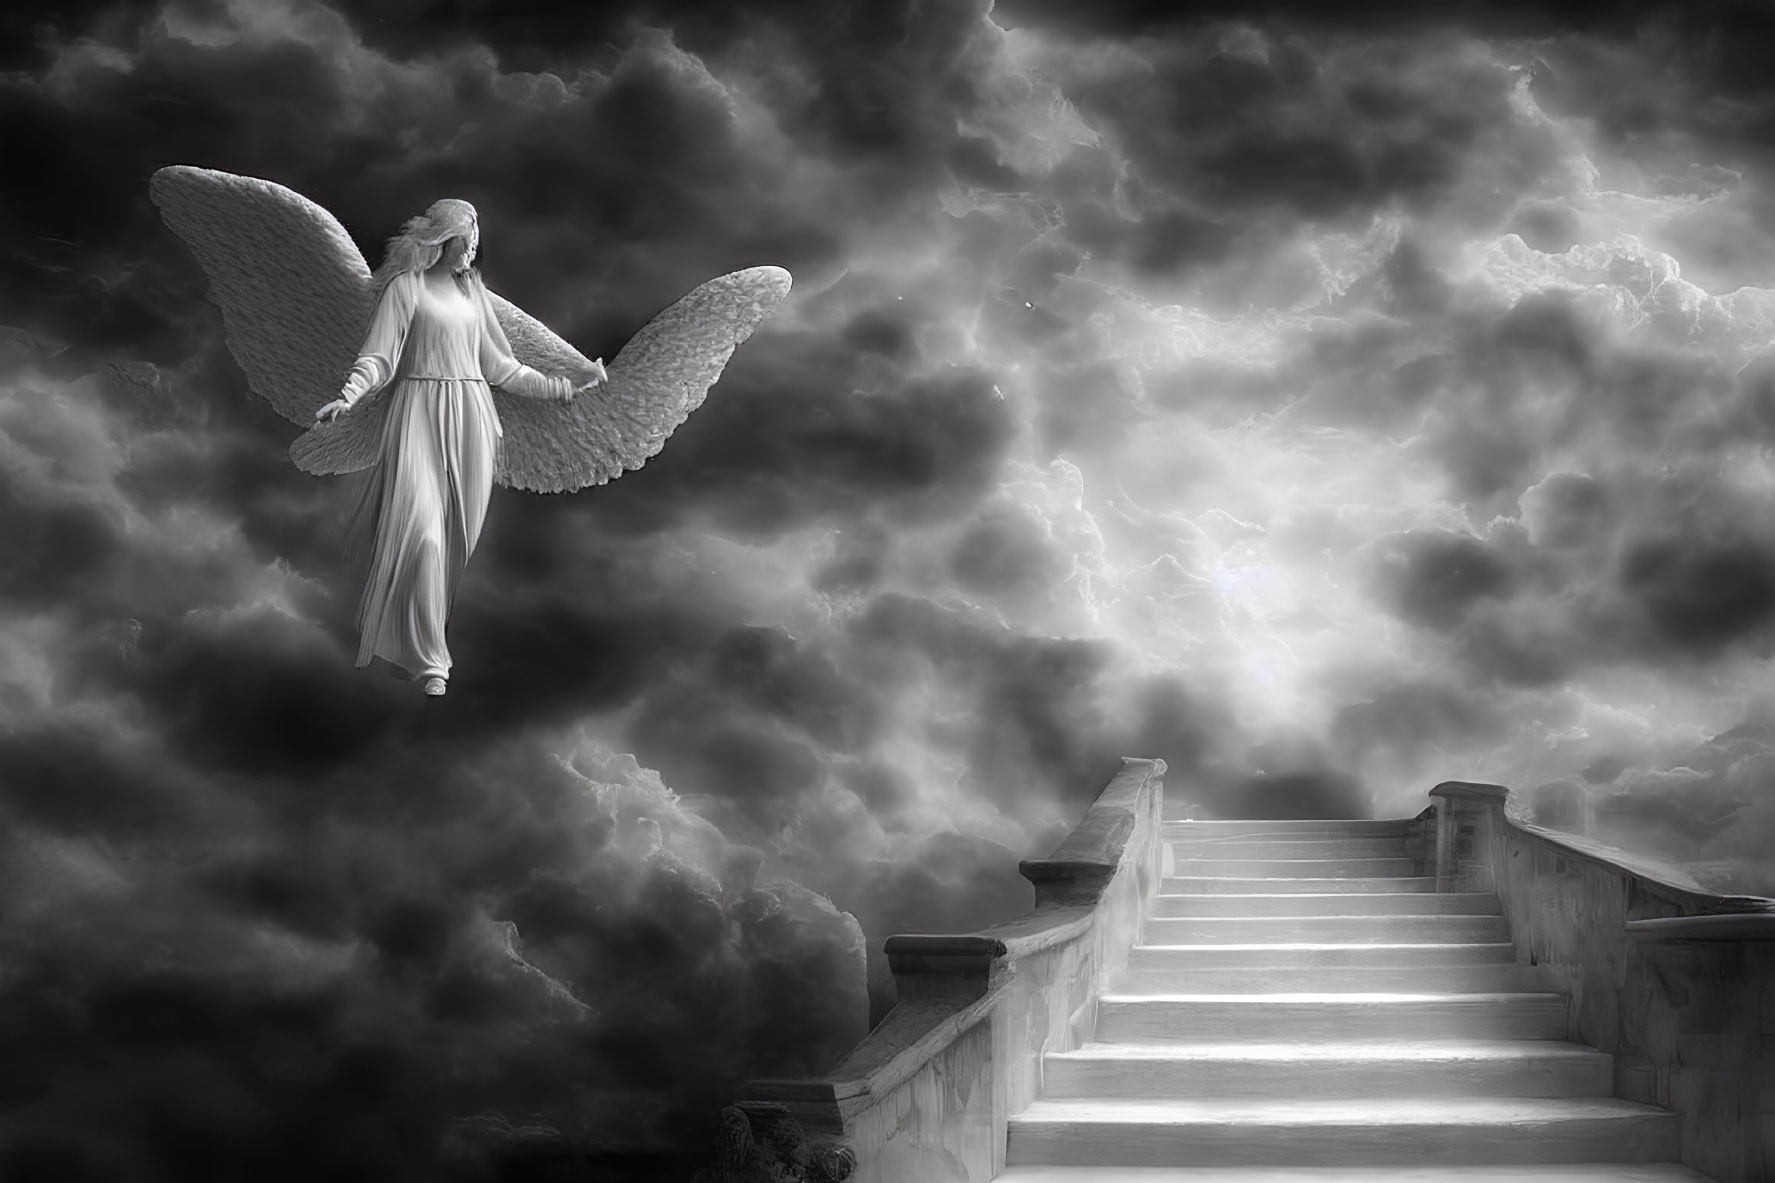 Angelic figure with widespread wings on staircase under dramatic cloudy sky